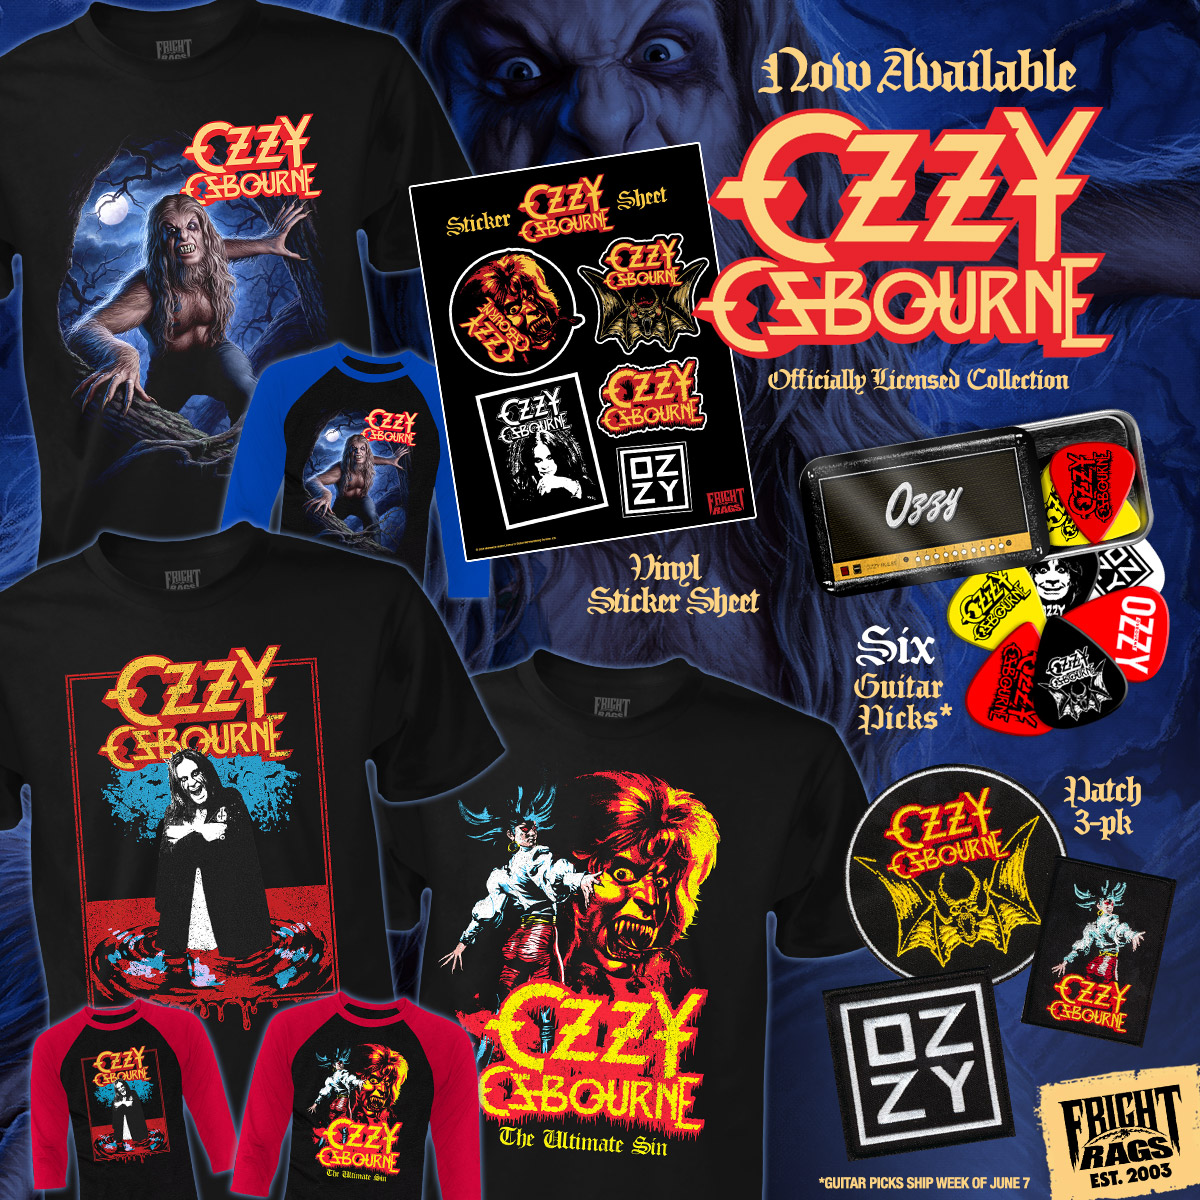 🦇 Officially licensed OZZY OSBOURNE gear is now available! New shirts, patch set, vinyl sticker sheet & exclusive guitar pick set w/ collector tin! (Note: Pick set ships week of June 07). Grab 'em now! 👉 Shop: bit.ly/4e0KkXw